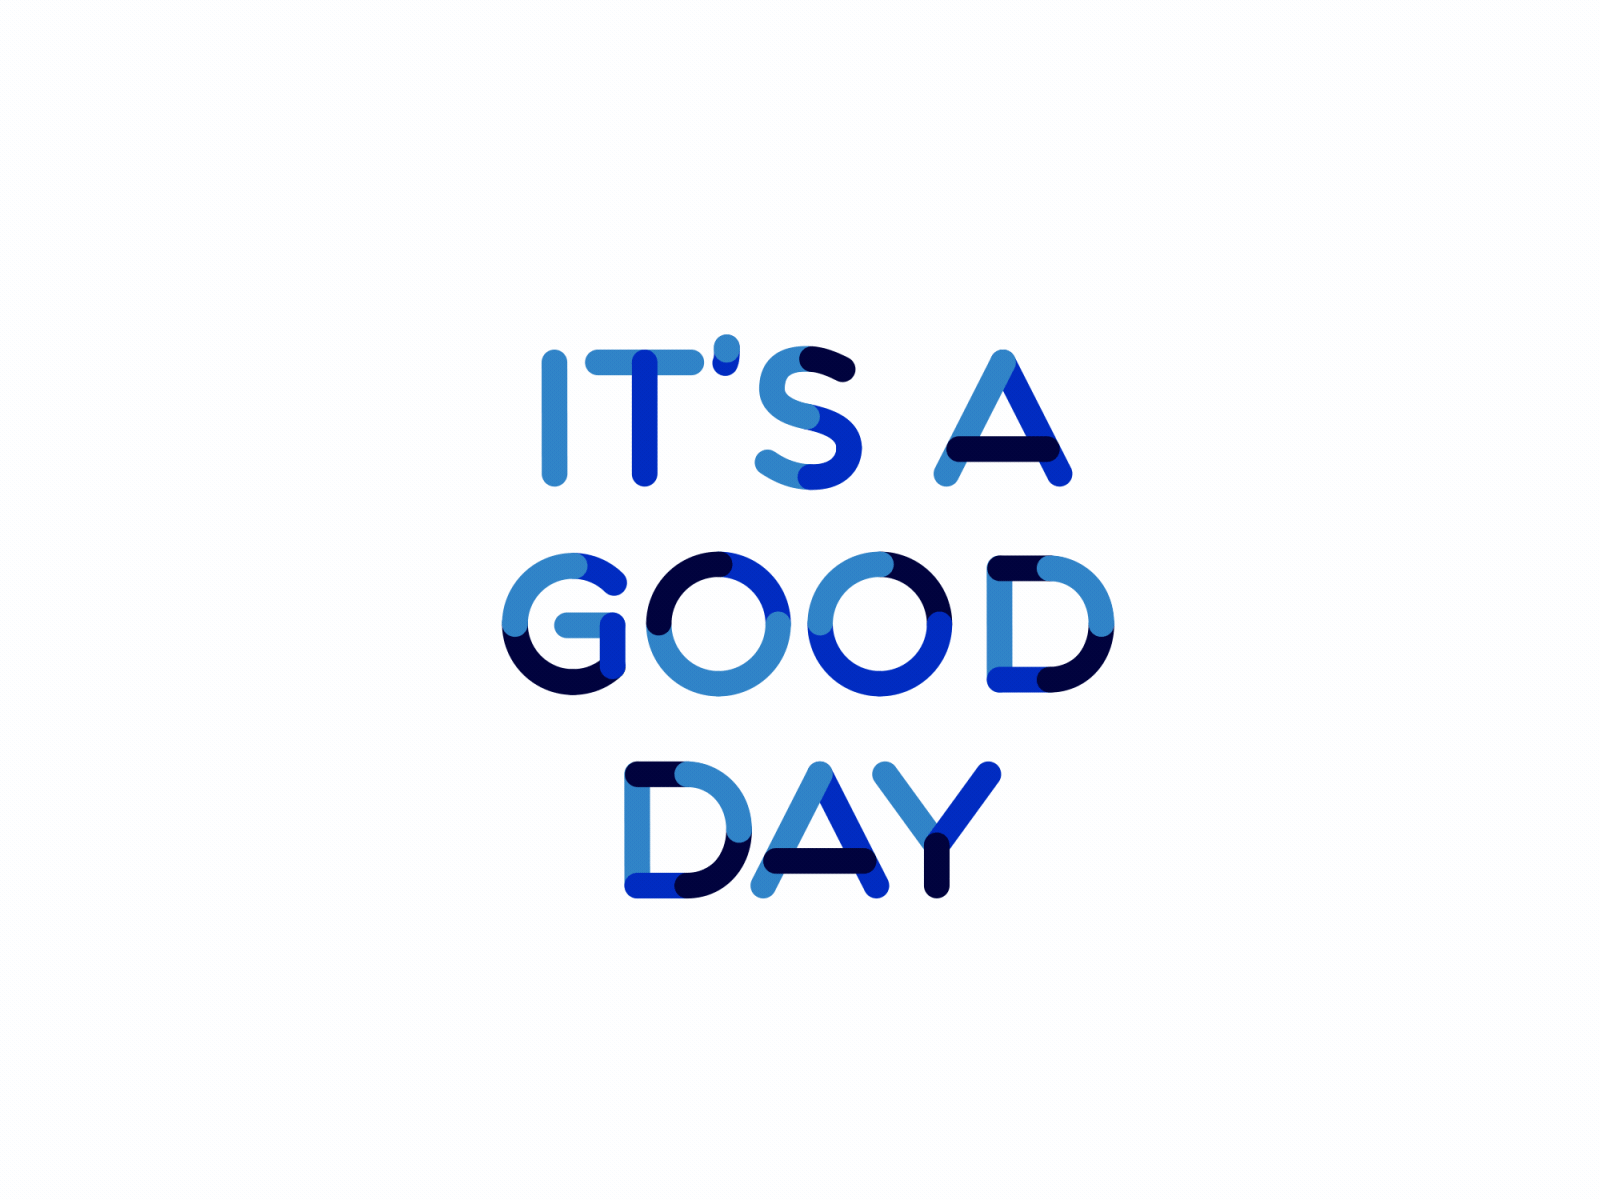 A Good Day after effects animated animography font kinetic multicolore type typeface typography